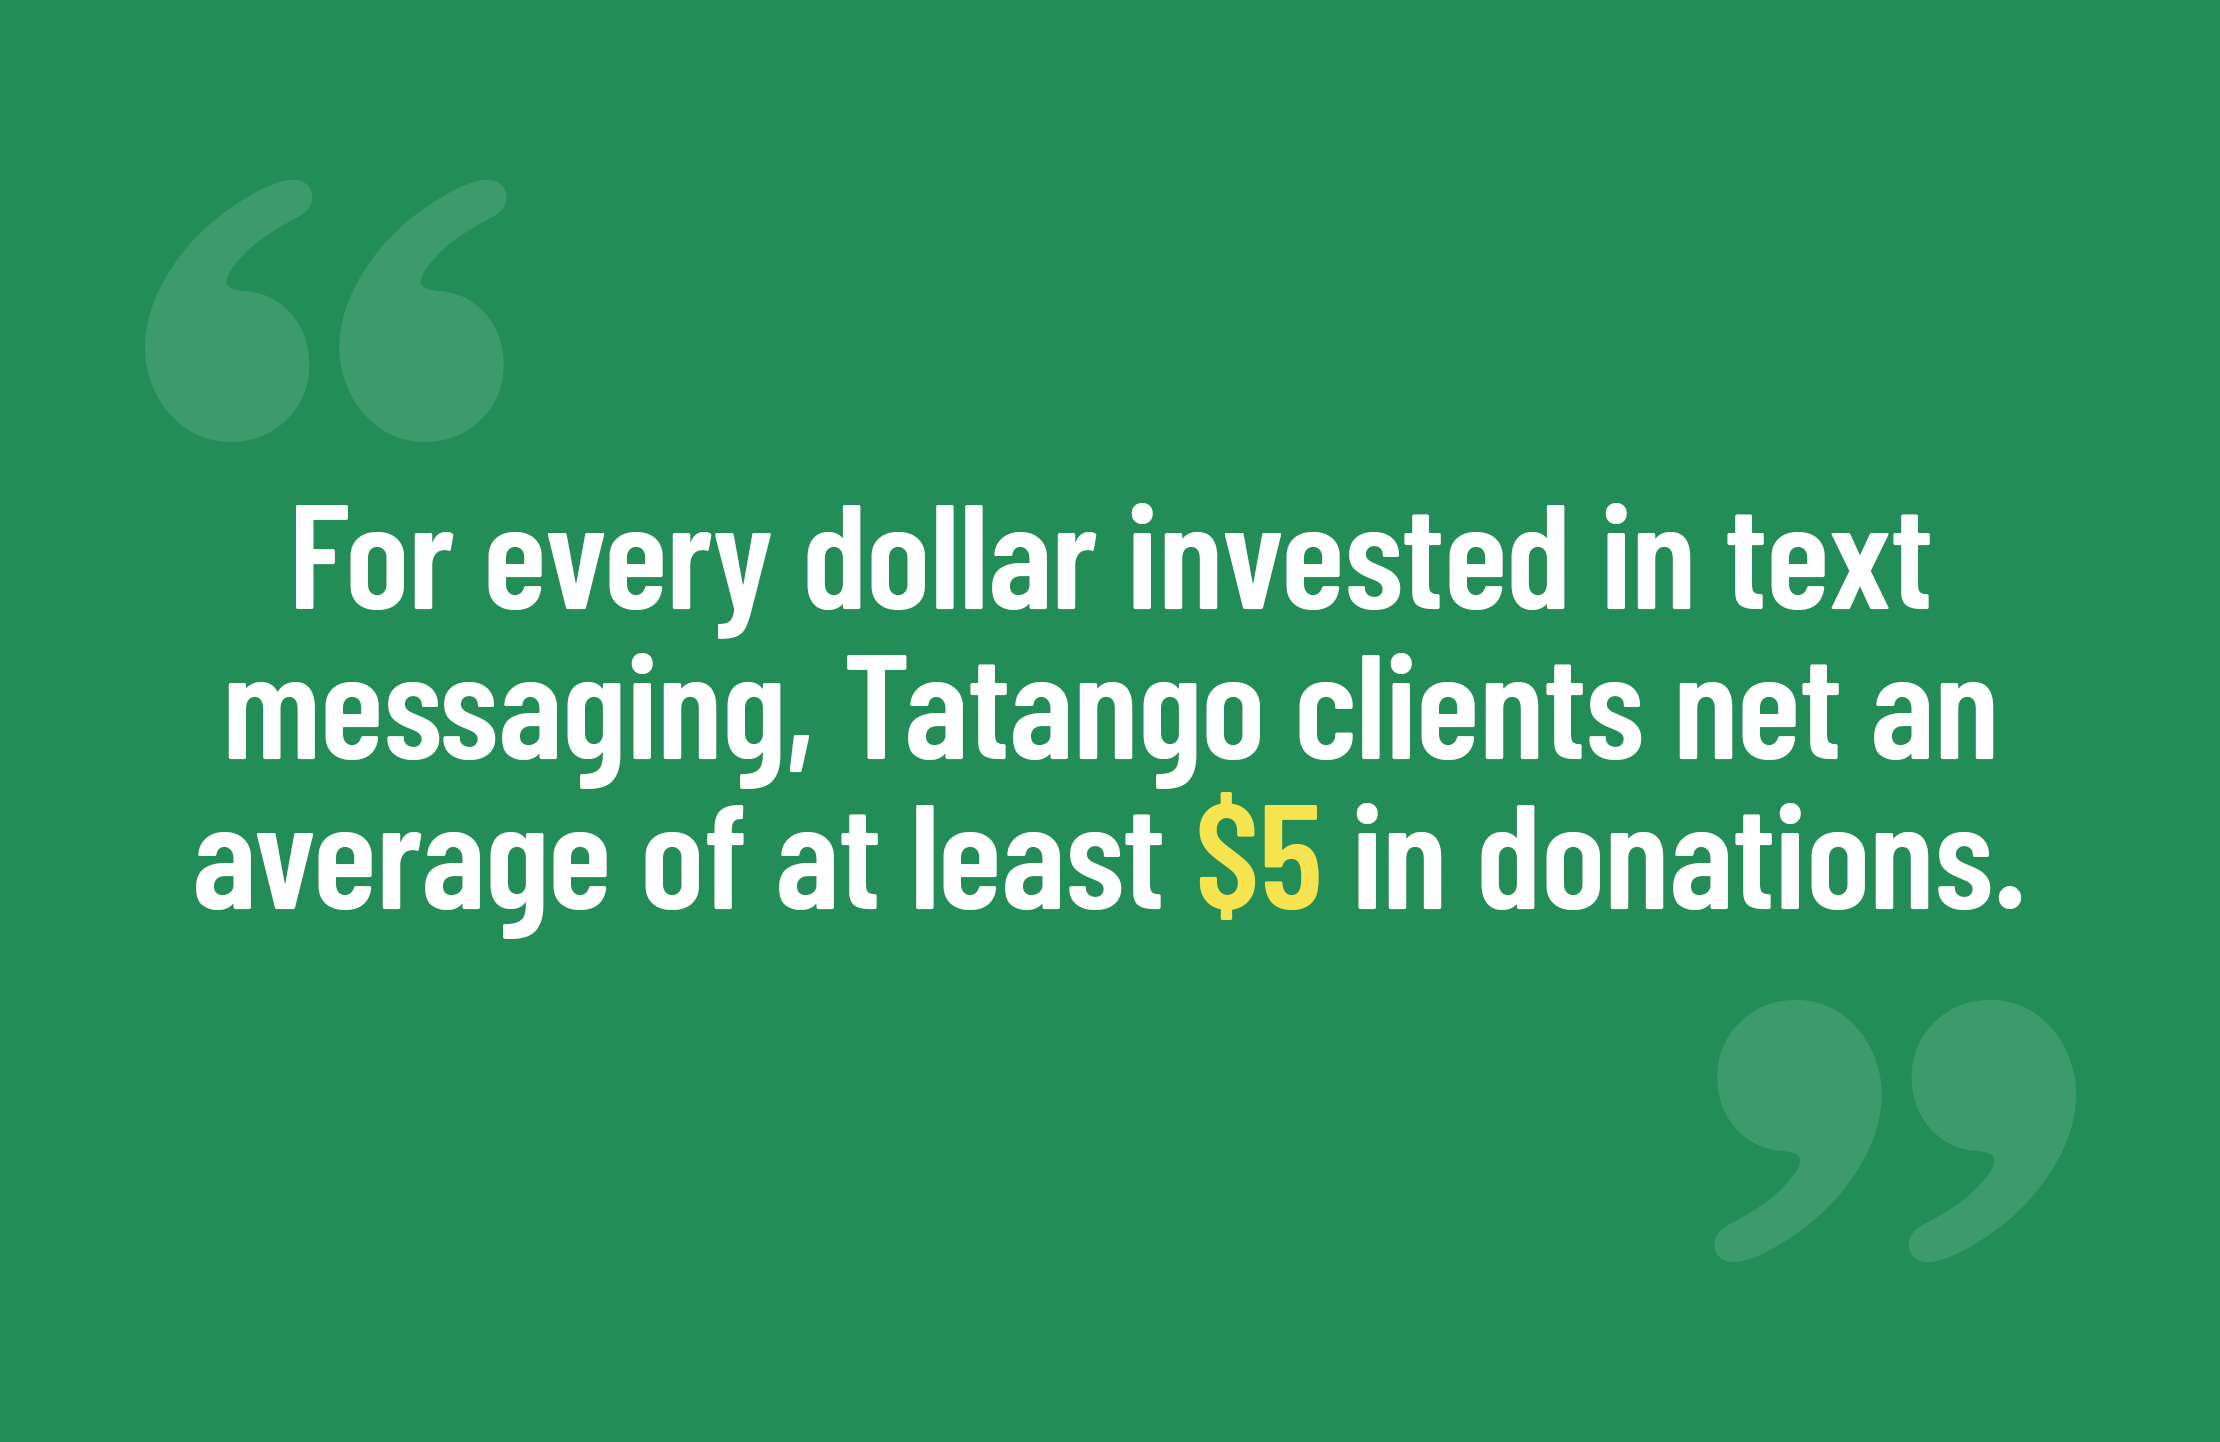 For every dollar invested in text messaging, Tatango clients net an average of at least $5 in donations